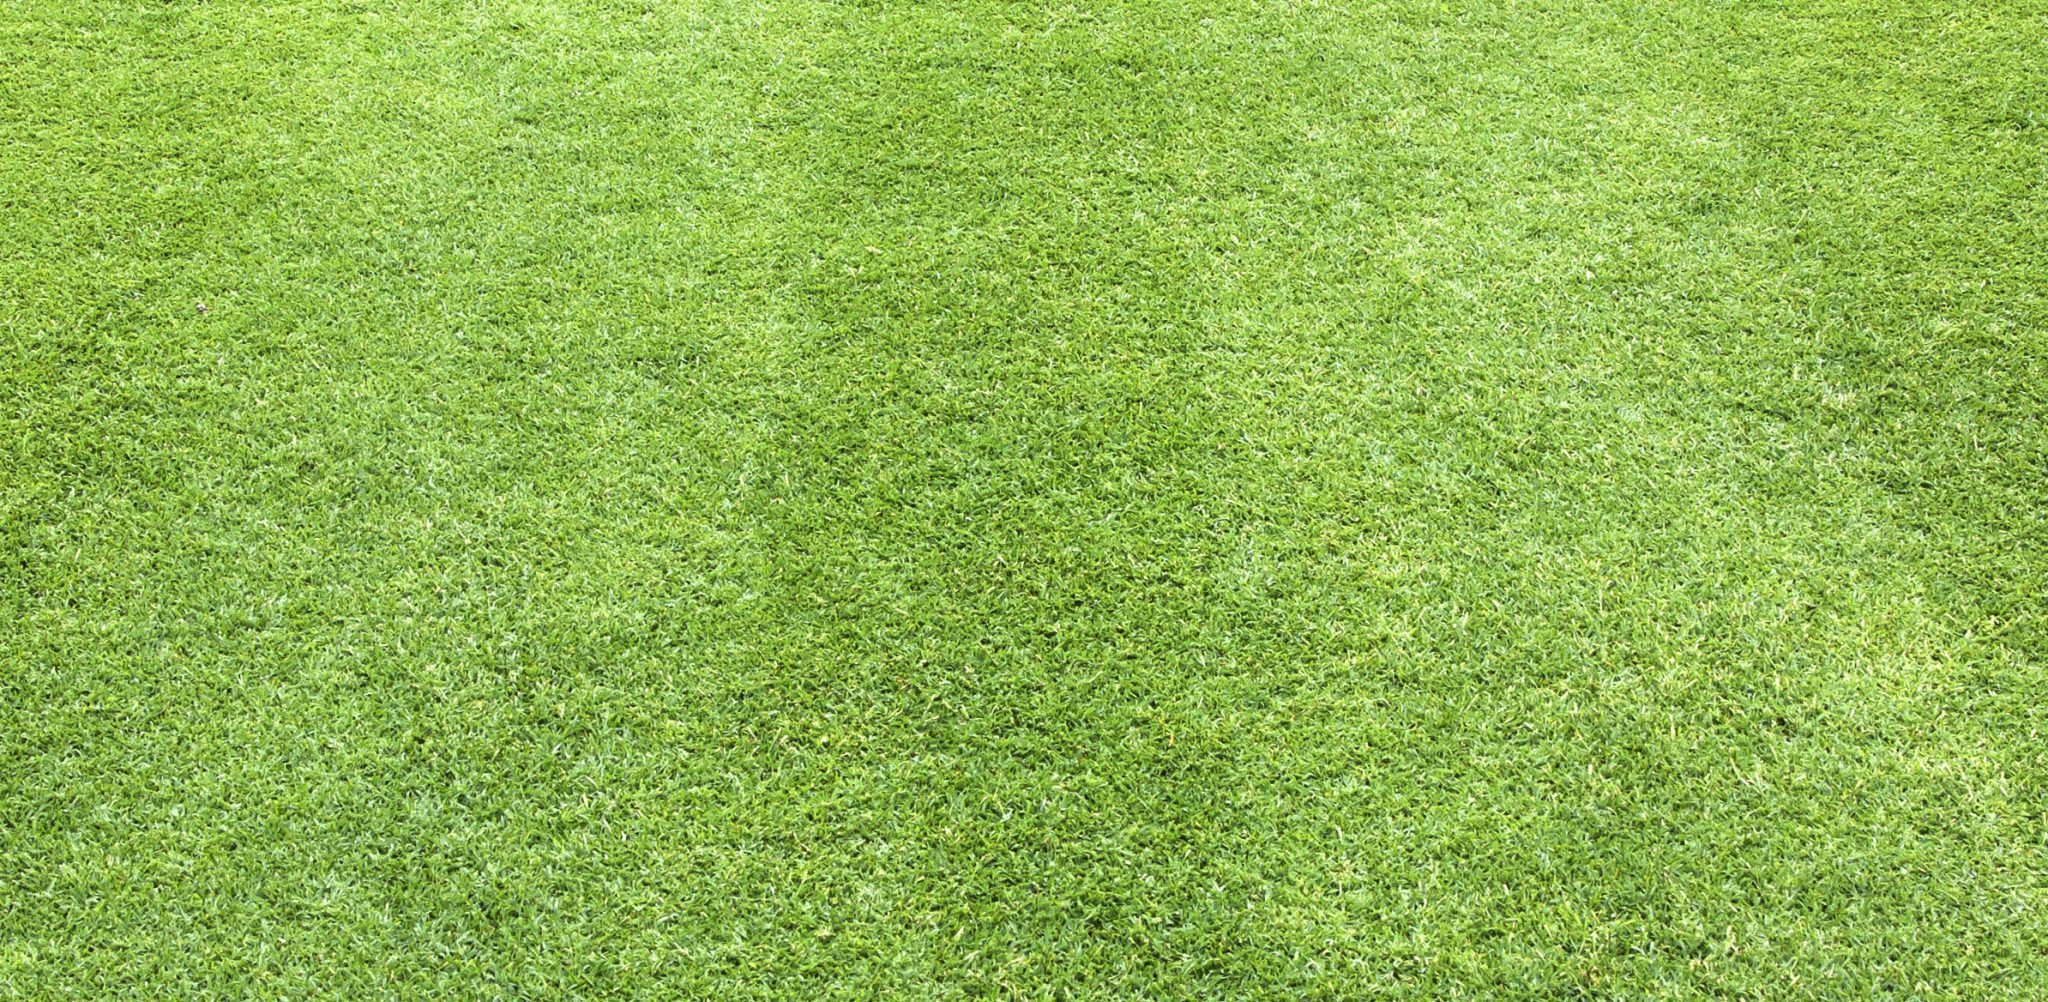 close-up of freshly green grass